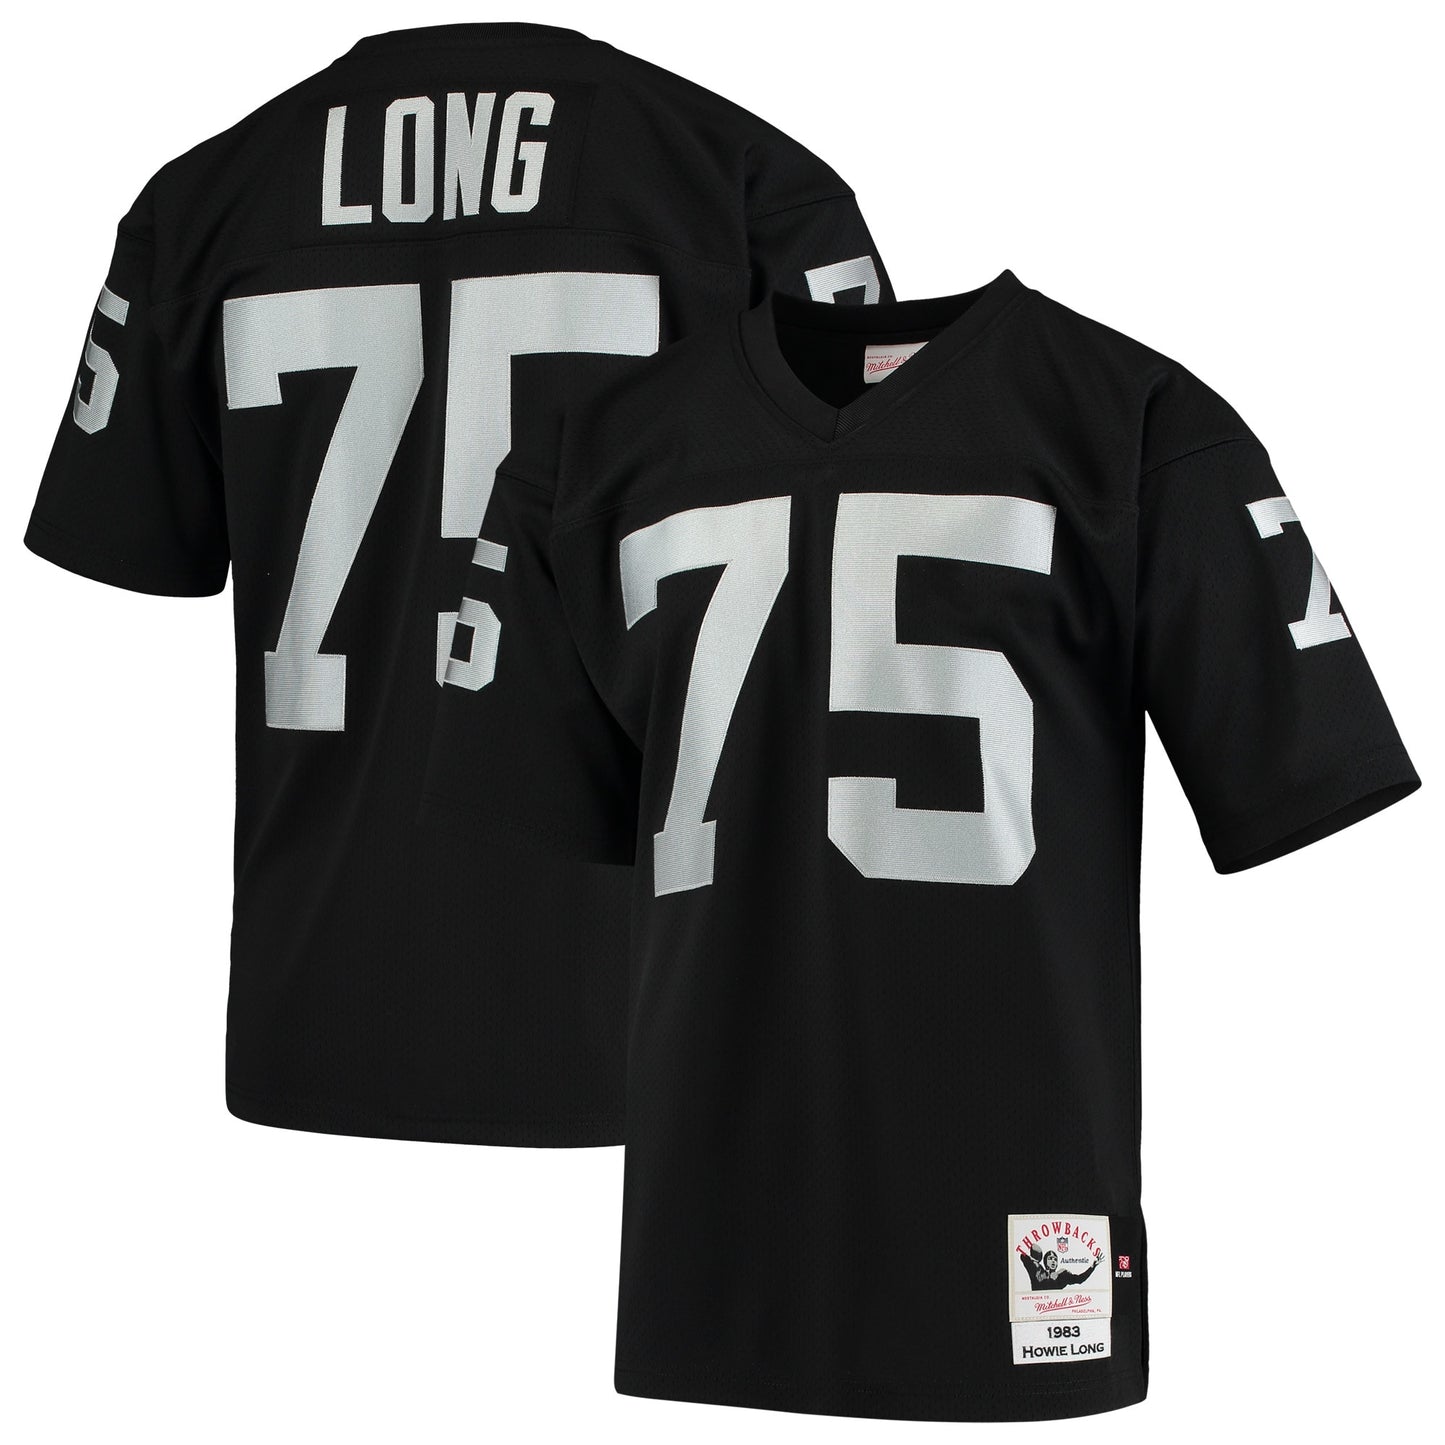 Howie Long Las Vegas Raiders Mitchell & Ness 1983 Authentic Throwback Retired Player Jersey - Black